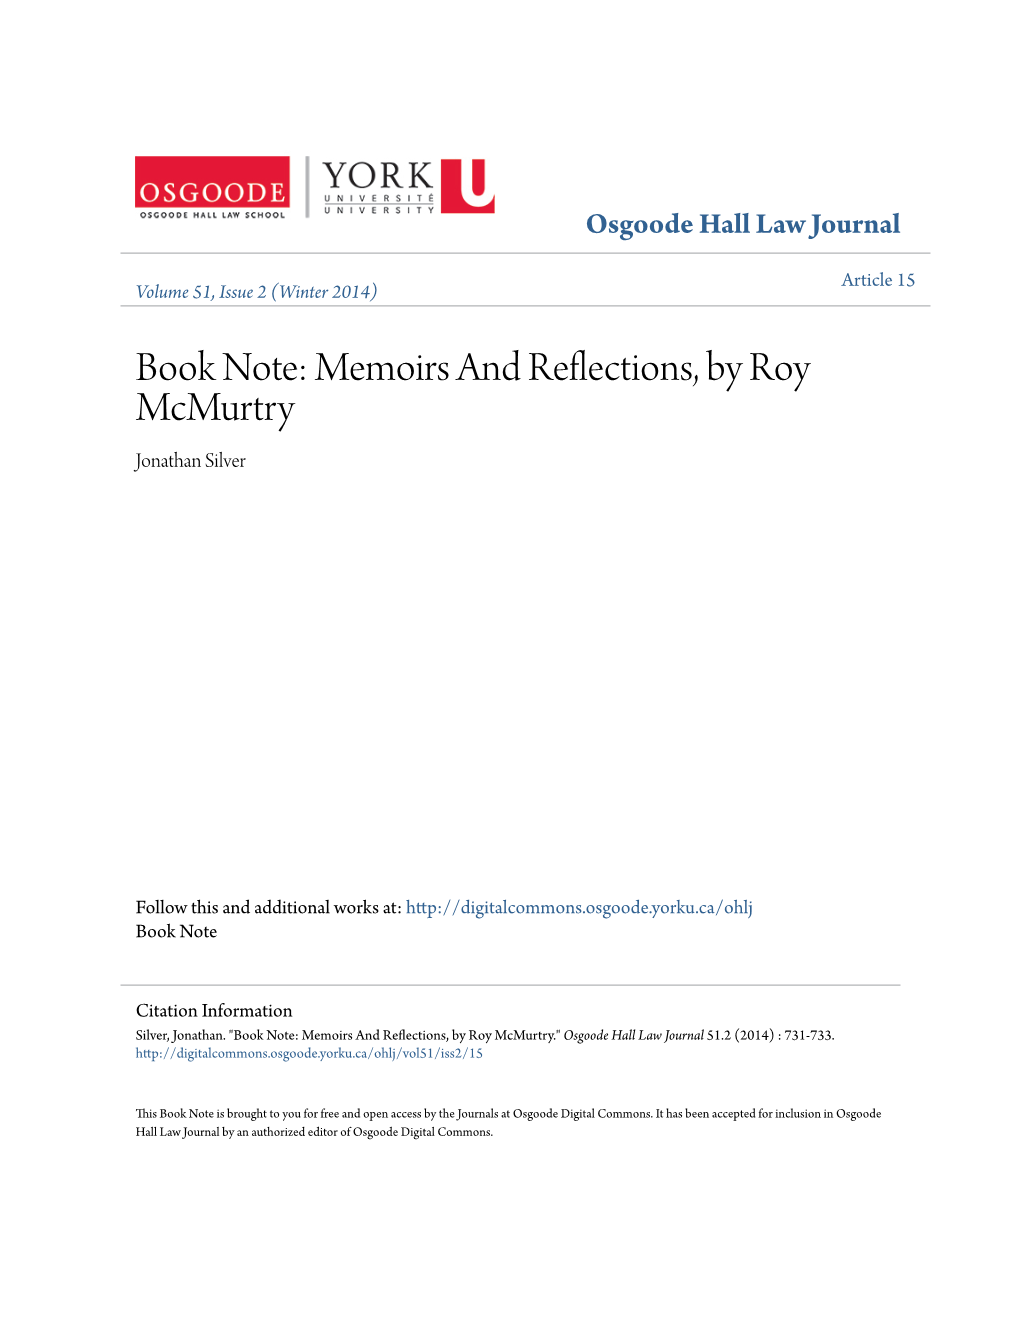 Book Note: Memoirs and Reflections, by Roy Mcmurtry Jonathan Silver